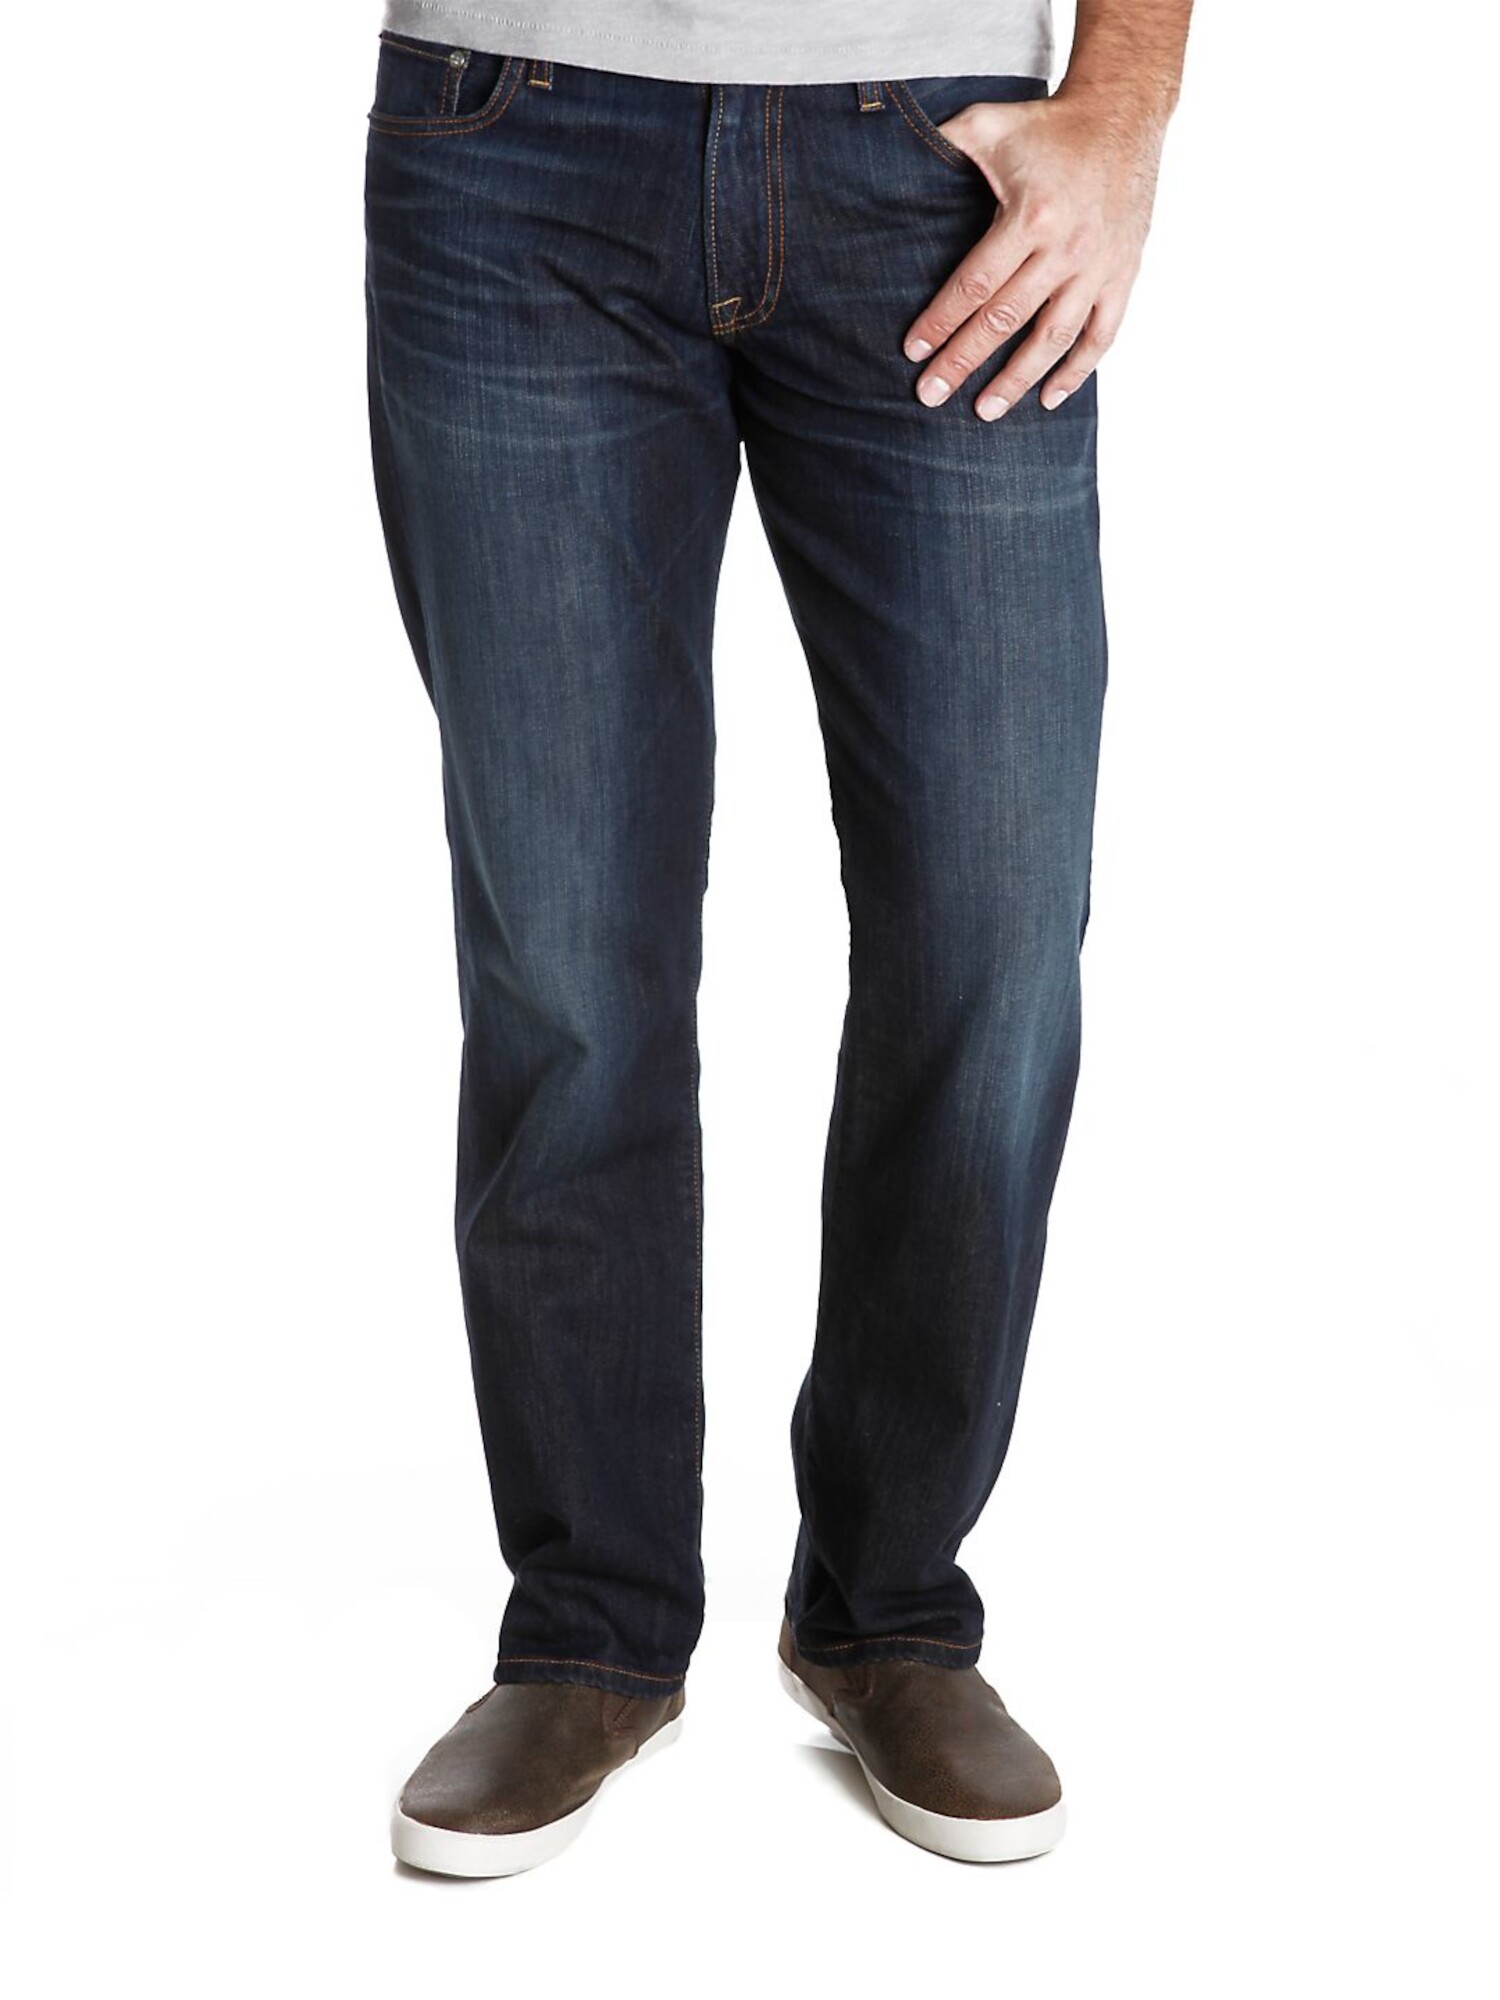 LUCKY BRAND Mens Navy Straight Leg, Straight Fit Denim Jeans W36/ L30 - image 1 of 2